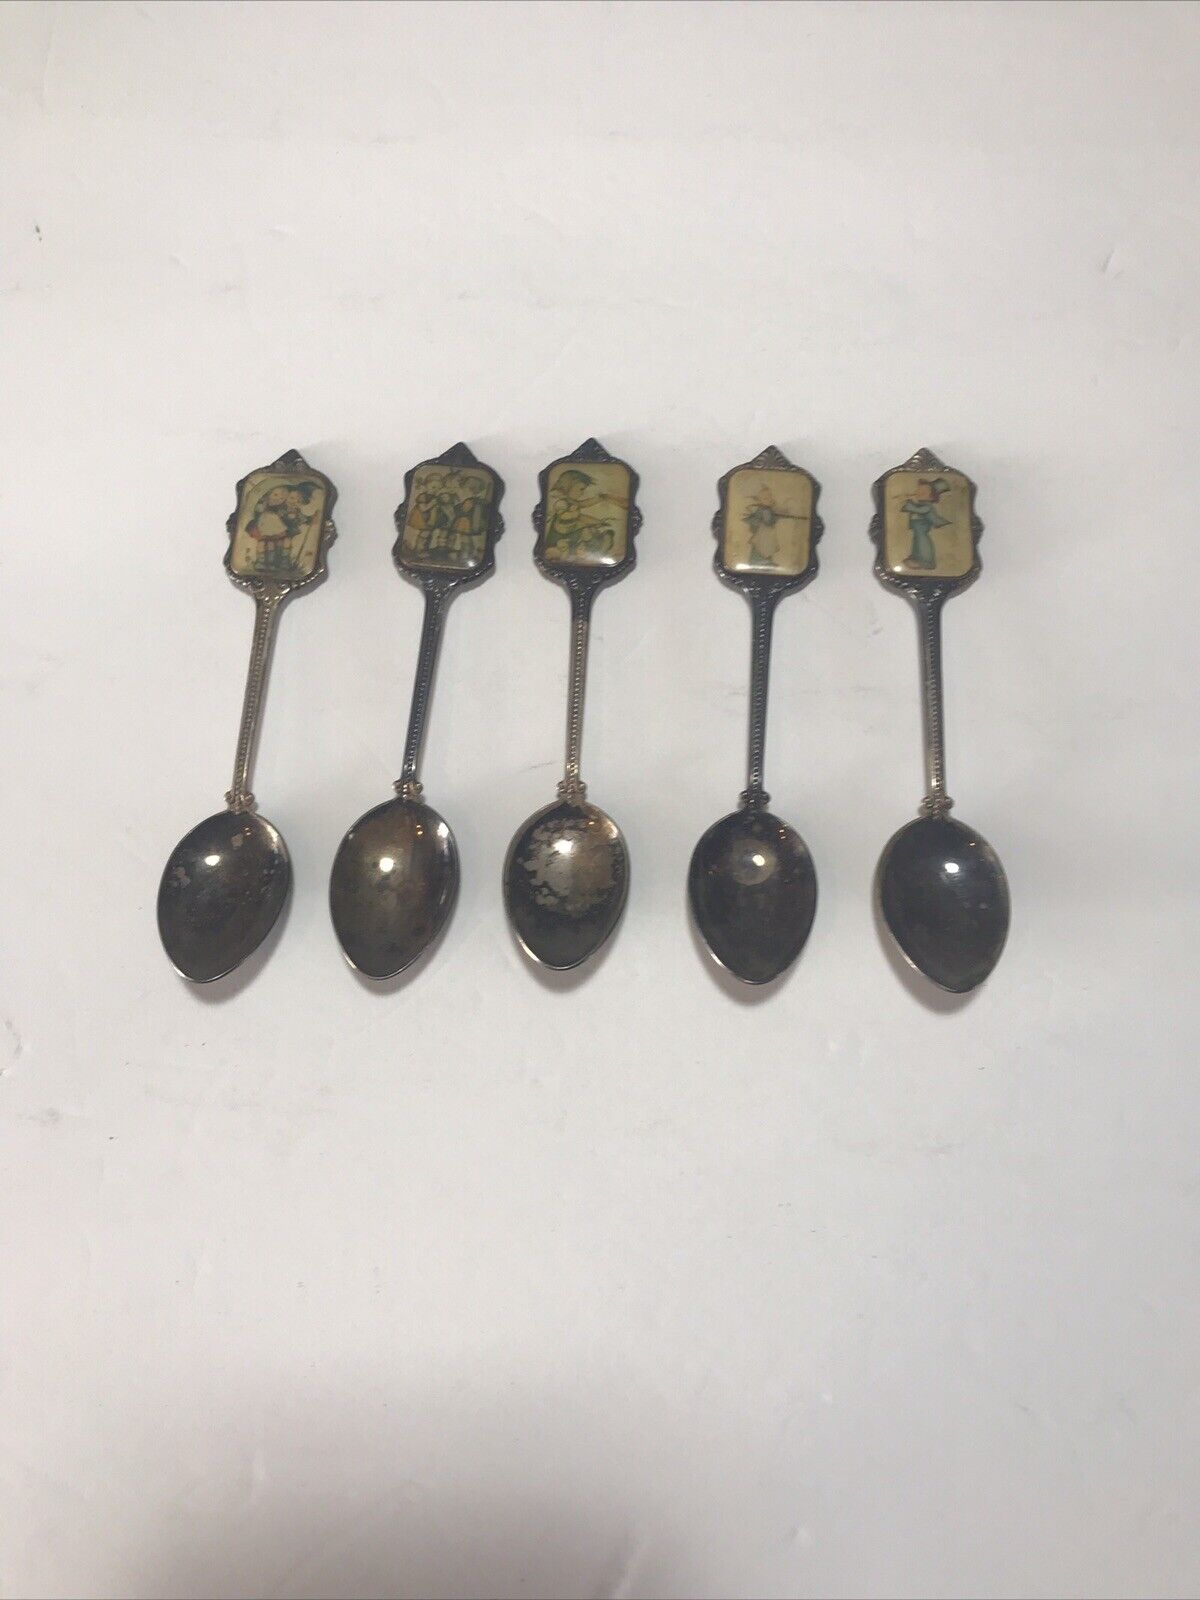 Vintage ARS Edition Hummel Spoons Silver Plate 1980’s Lot Of 5 - 5”